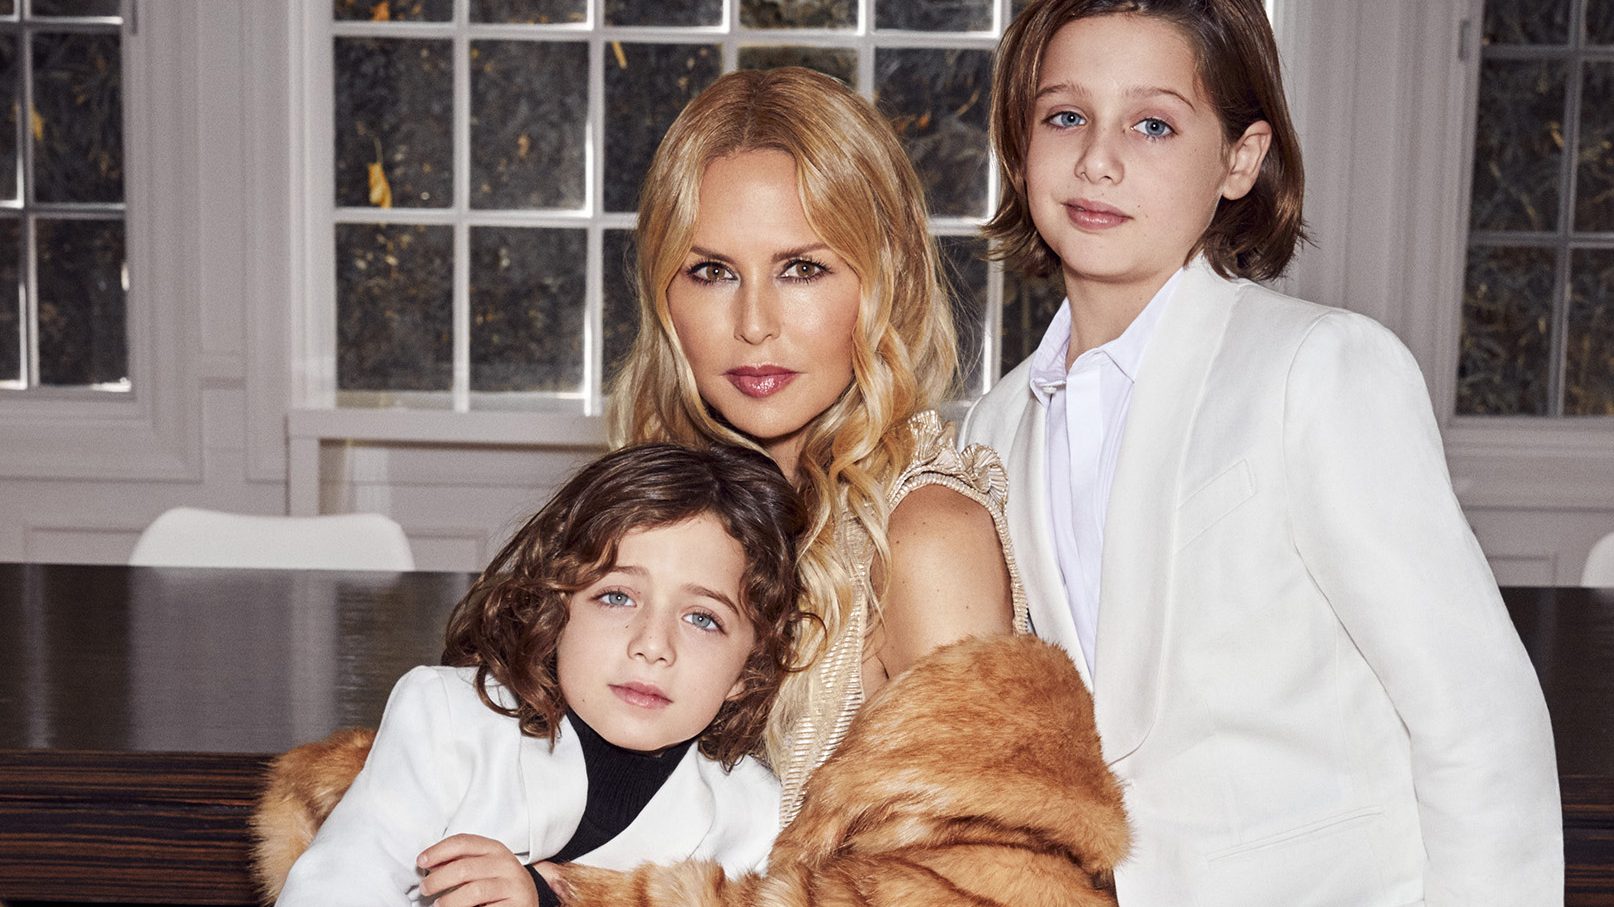 Get Your Glam on with Rachel Zoe's New Janie and Jack Collab